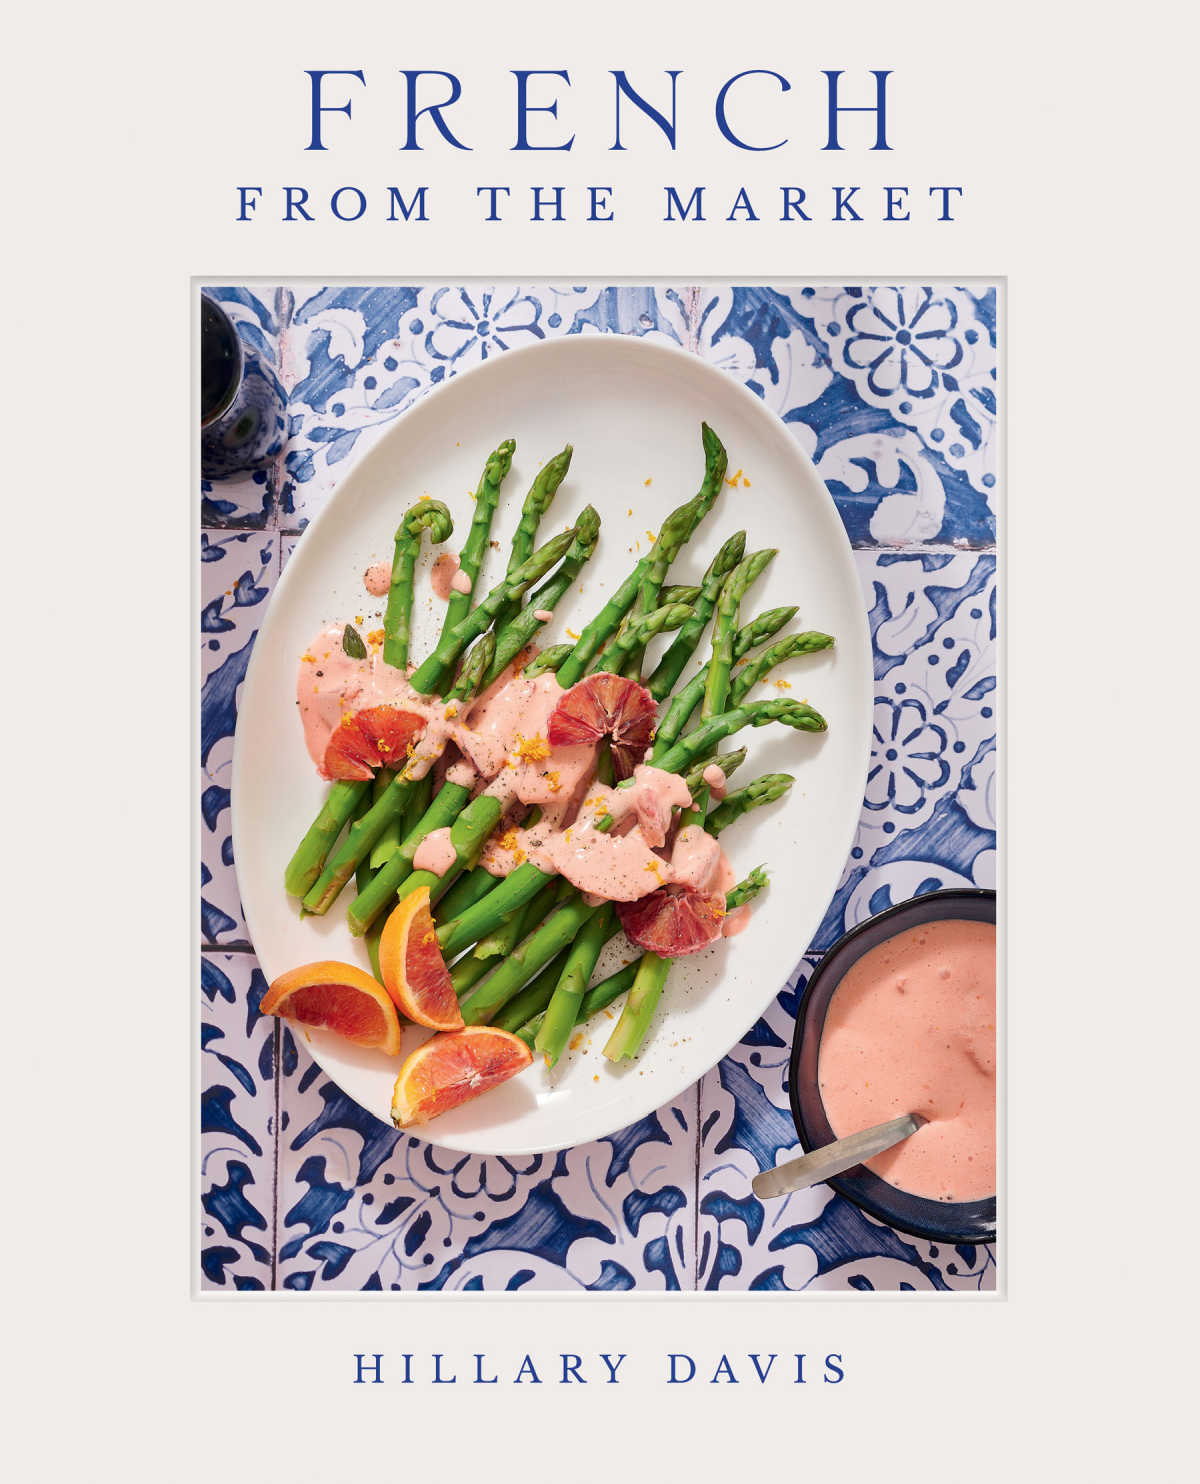 Bring the magic of French cuisine to your everyday meals with French From the Market. The cookbook offers 100+ easy recipes for starters, mains, desserts, all using fresh, seasonal ingredients. Learn the art of French home cooking with this beautifully photographed cookbook!